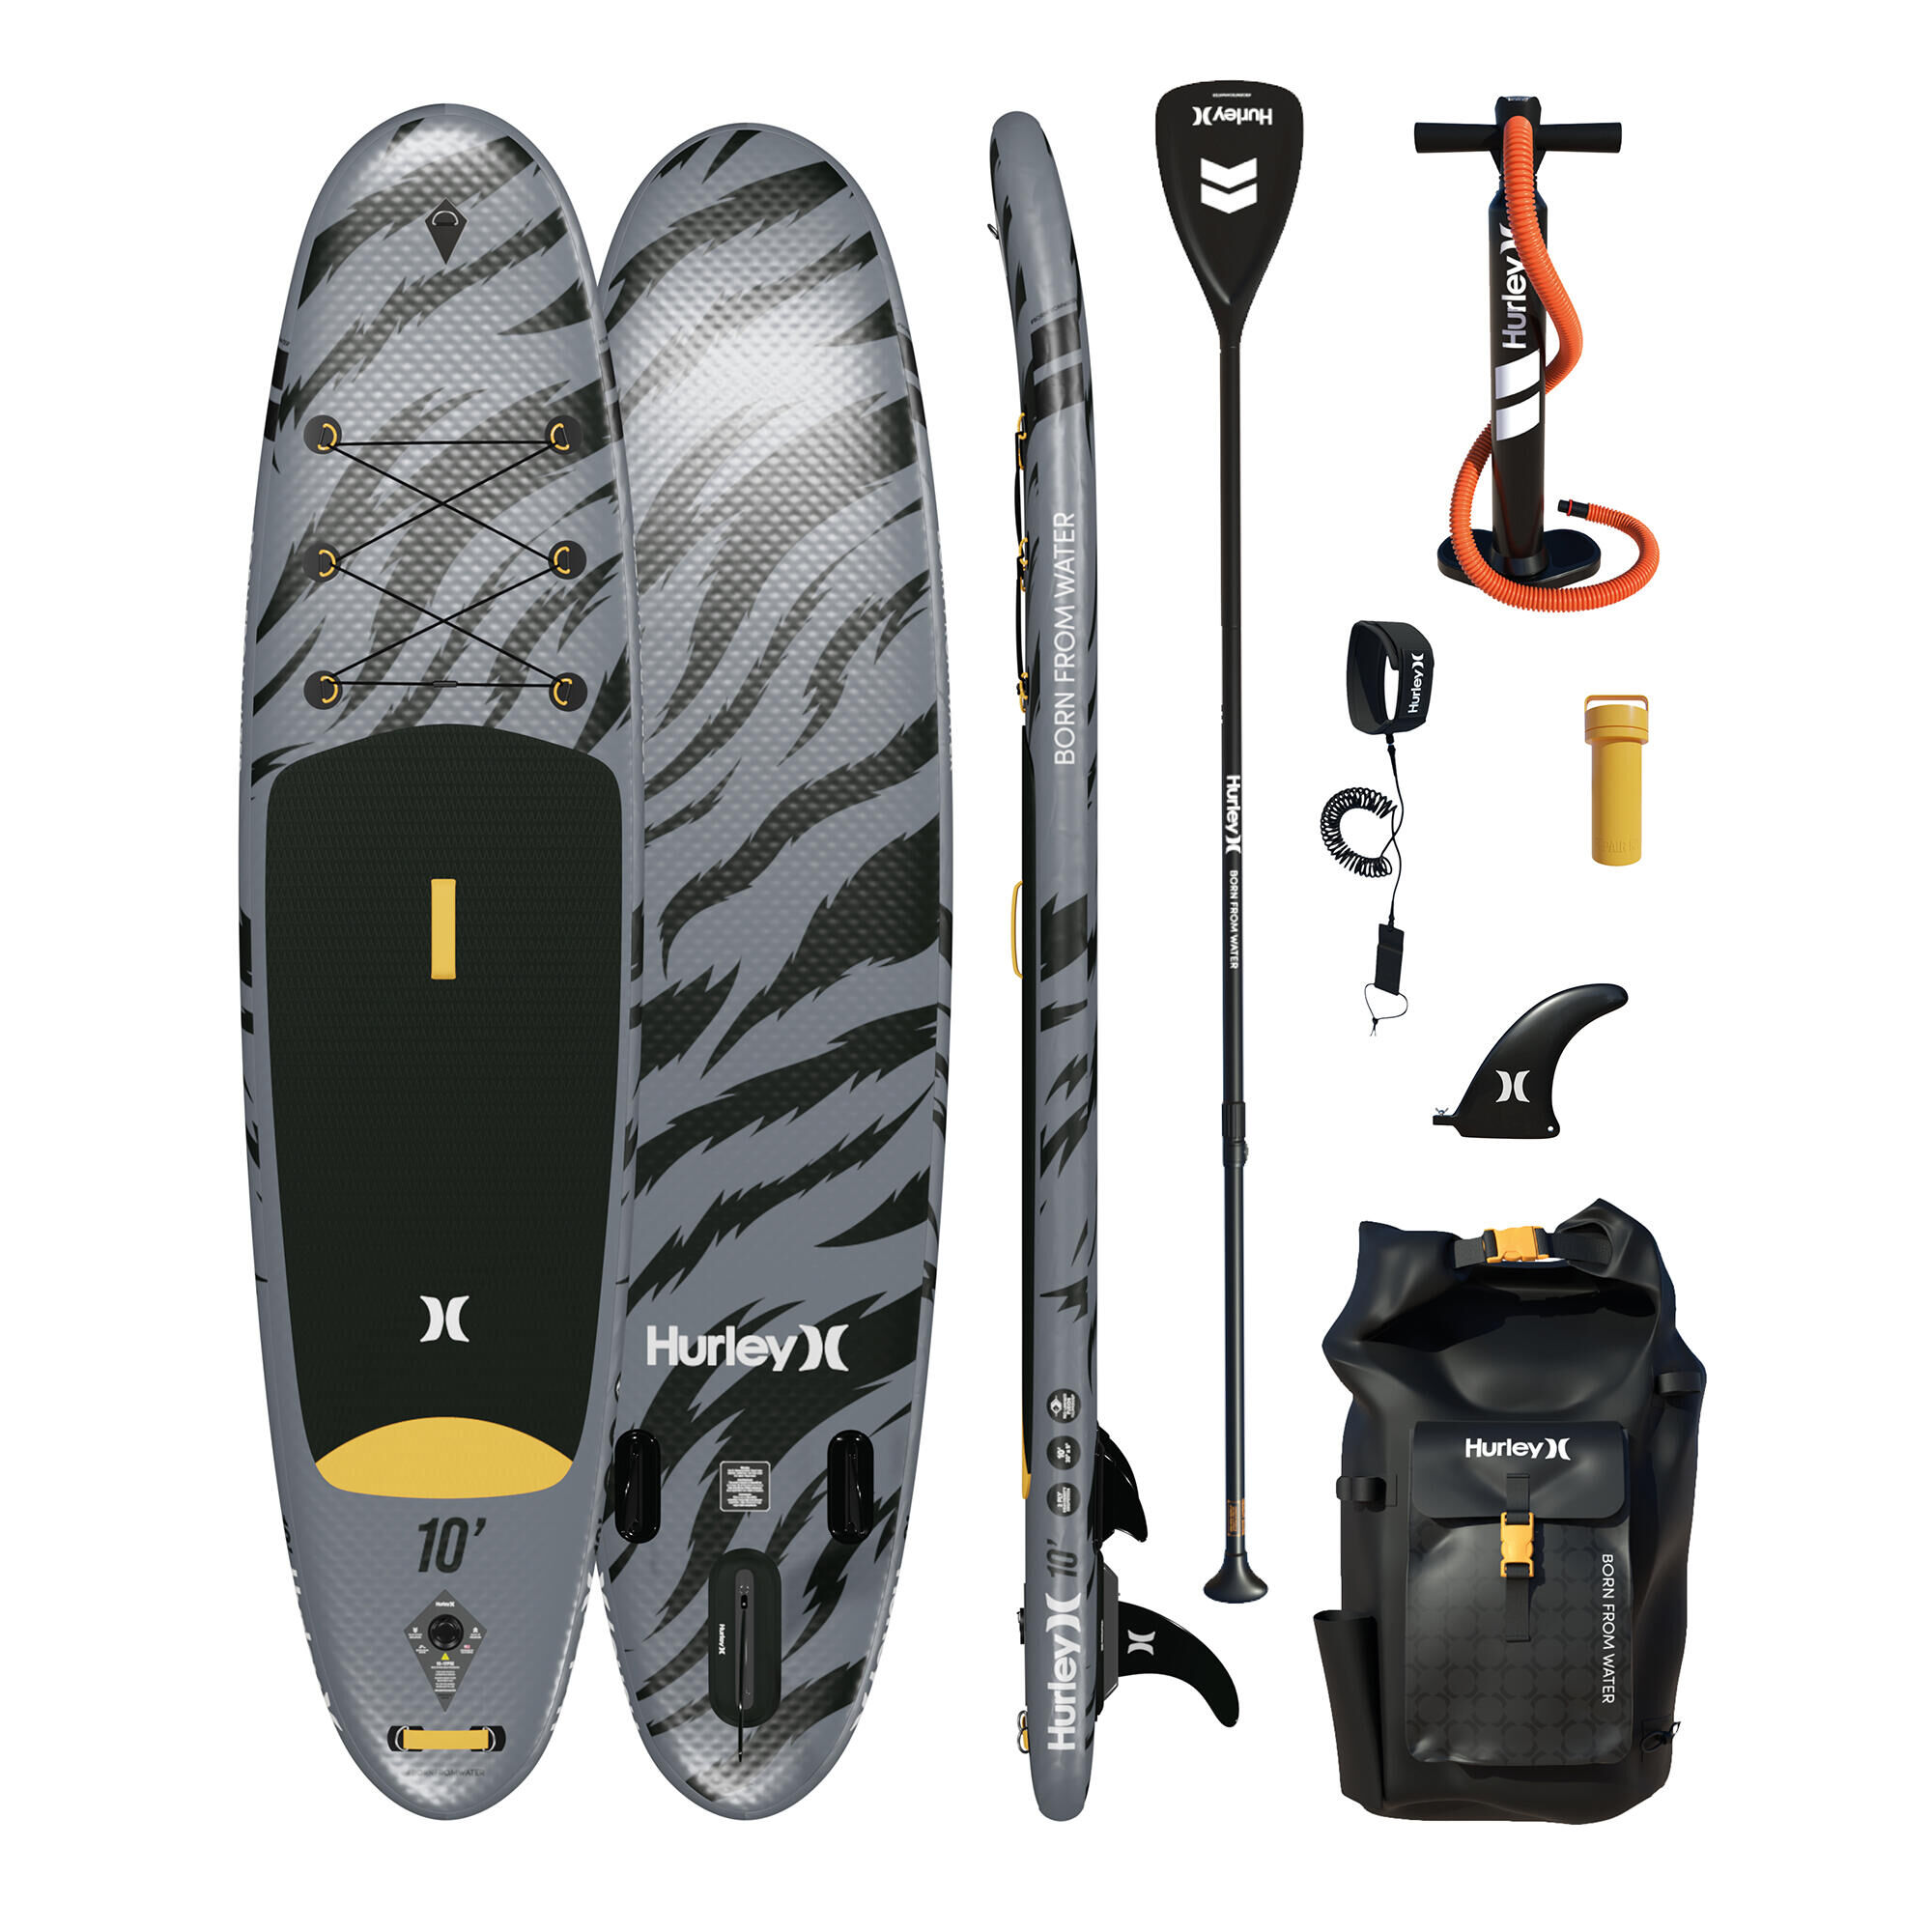 HURLEY Hurley Advantage BLACK TIGER 10' Inflatable Paddle Board Package